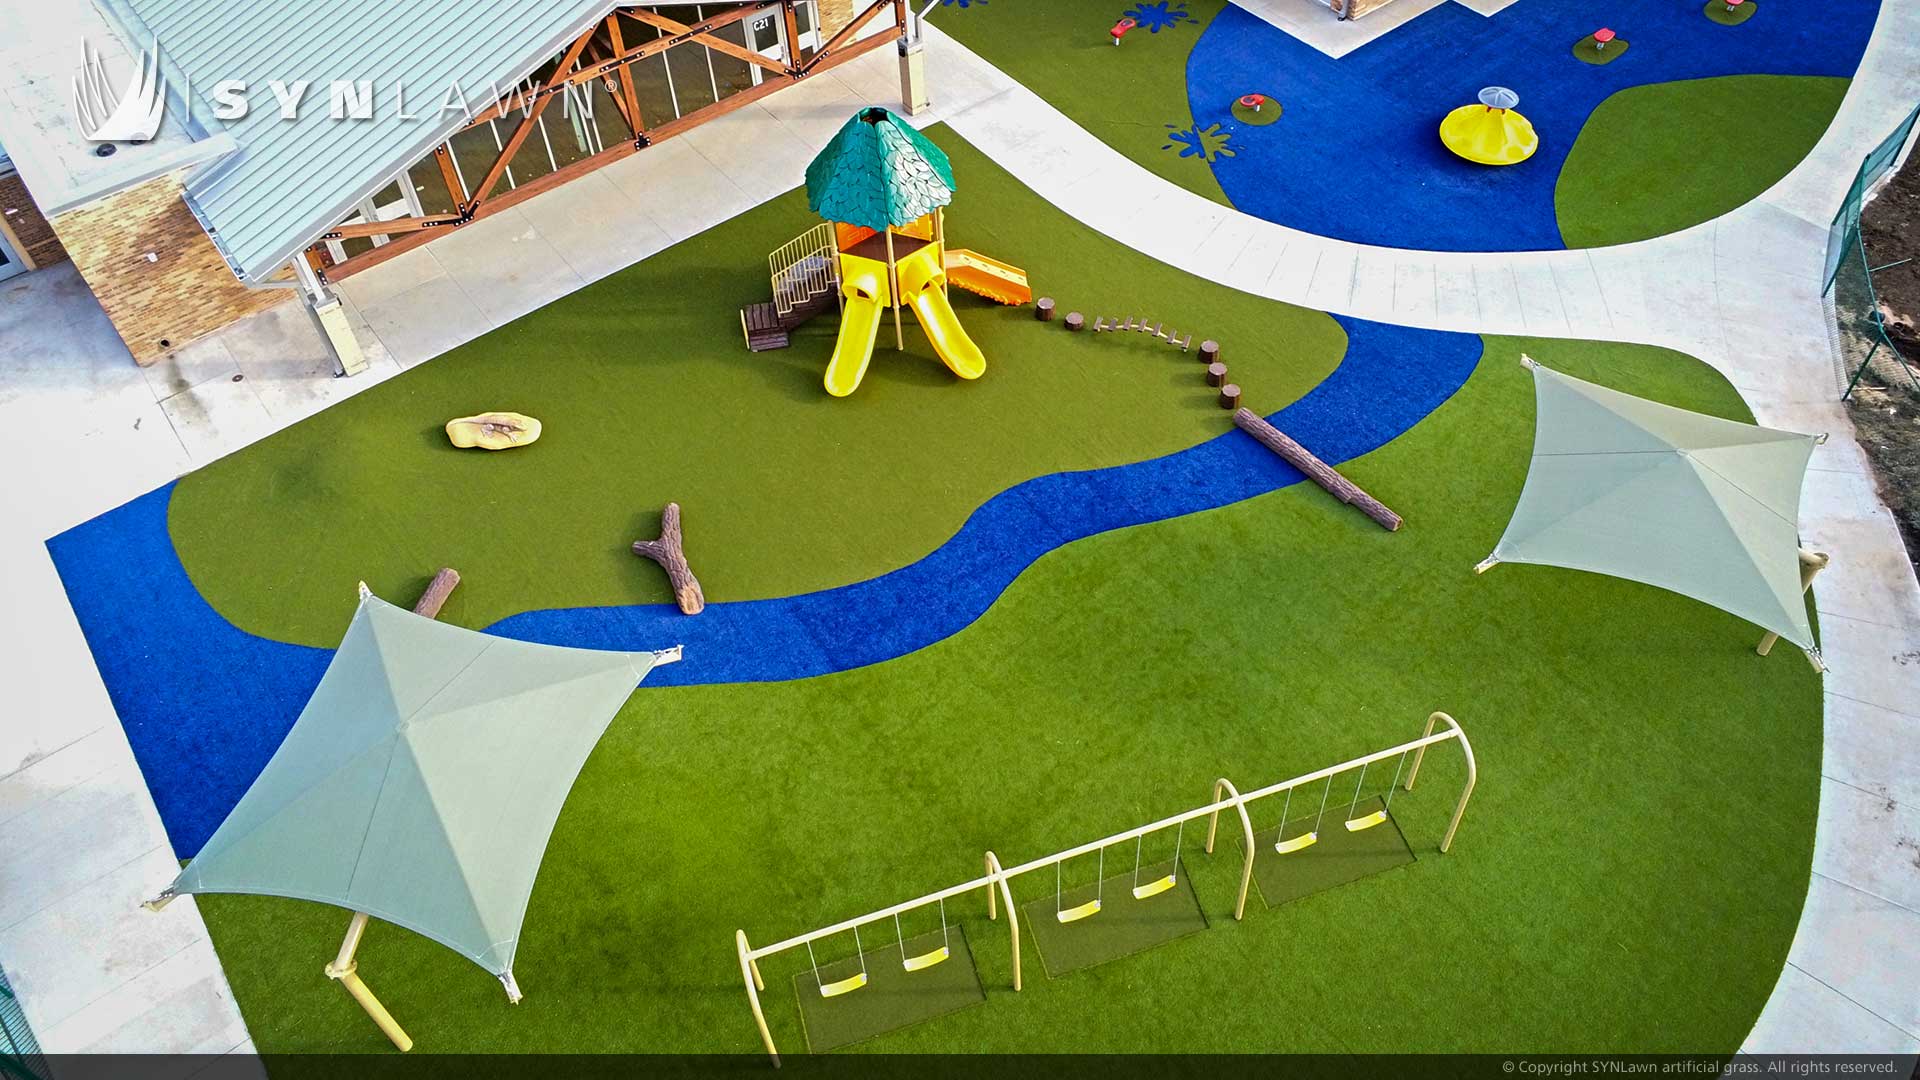 image of SYNLawn artificial playground grass at Liggett Trails Early Education Center in Kansas City